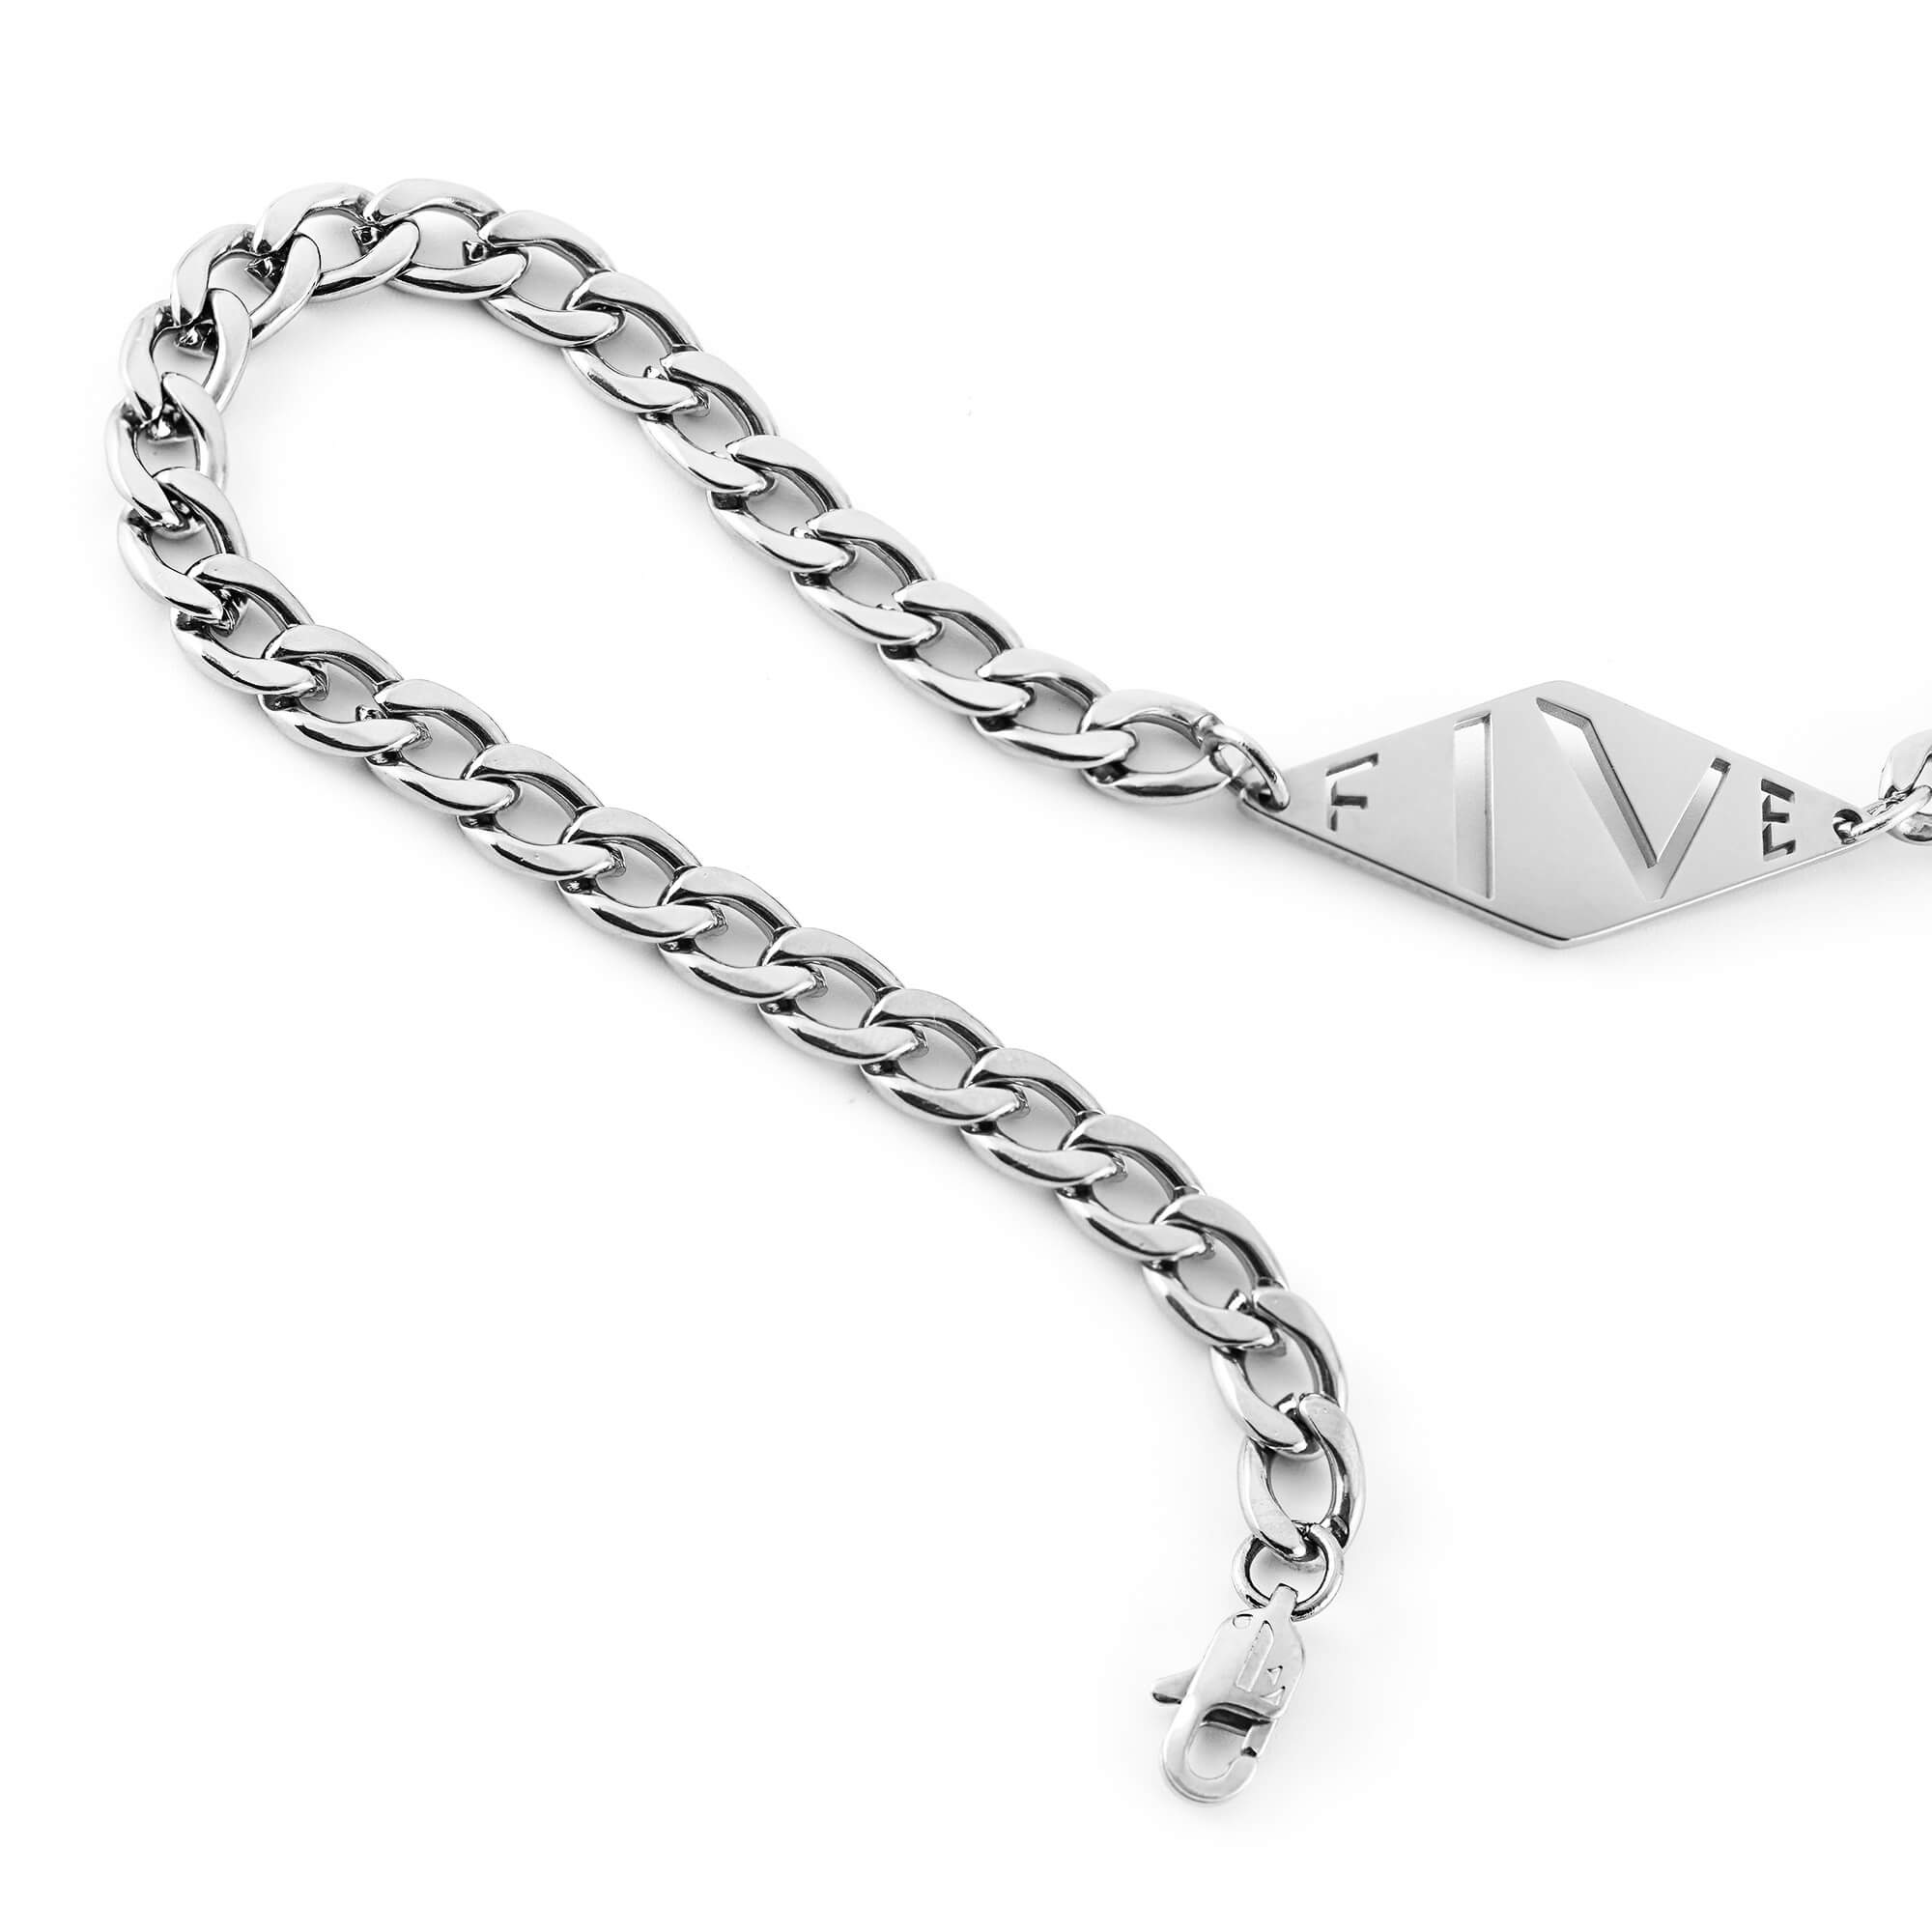 Dal bracelet by Five Jwlry for men, uniquely designed in Montreal, showcasing a wide woven Cuban link chain in silver color, adorned with the brand's signature lozenge logo tag.